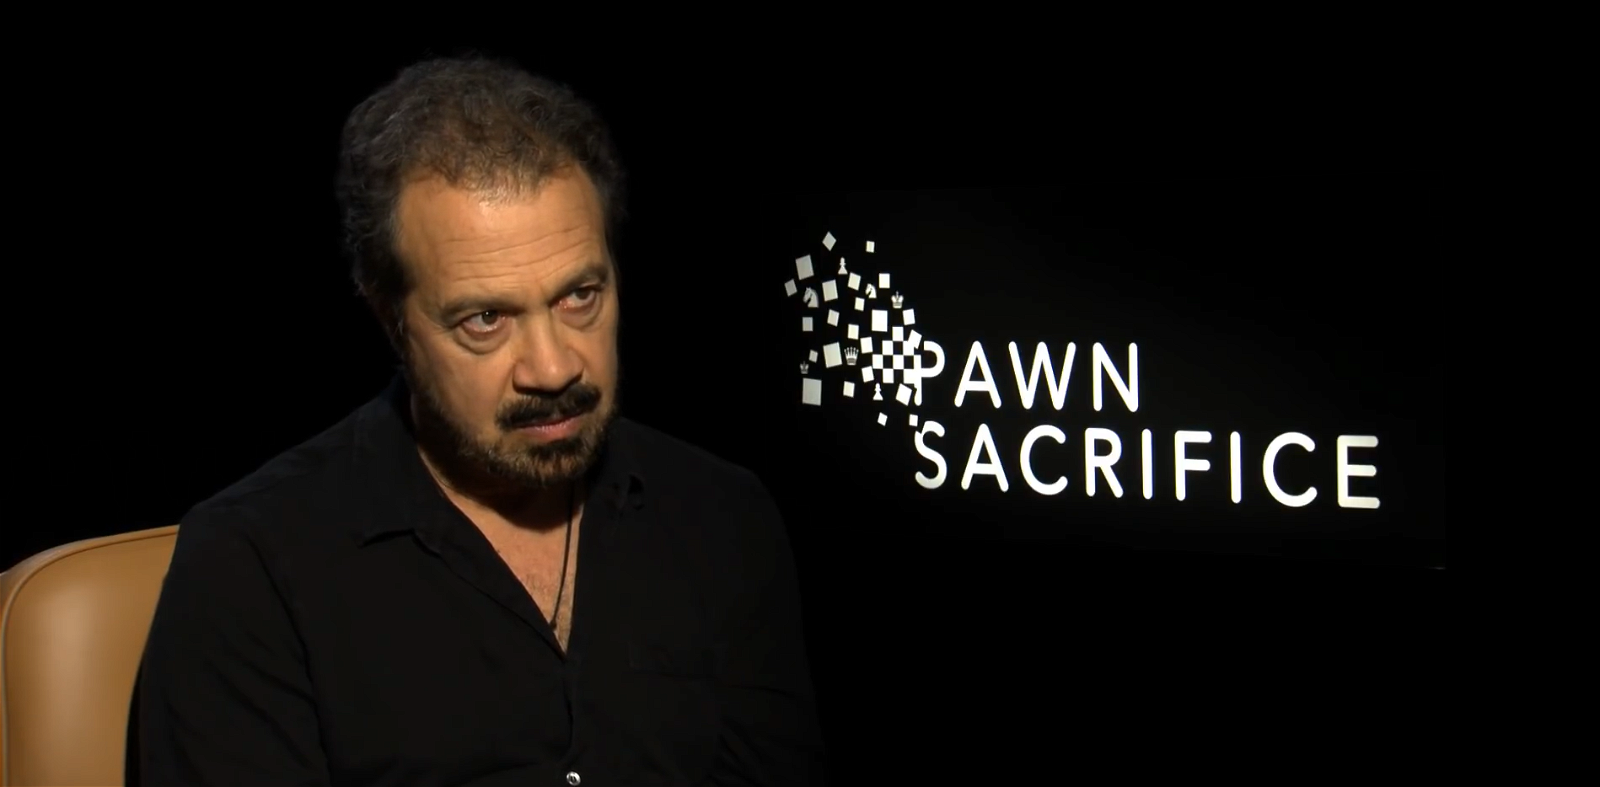 Director Ed Zwick | Credit: Film Courage on YouTube